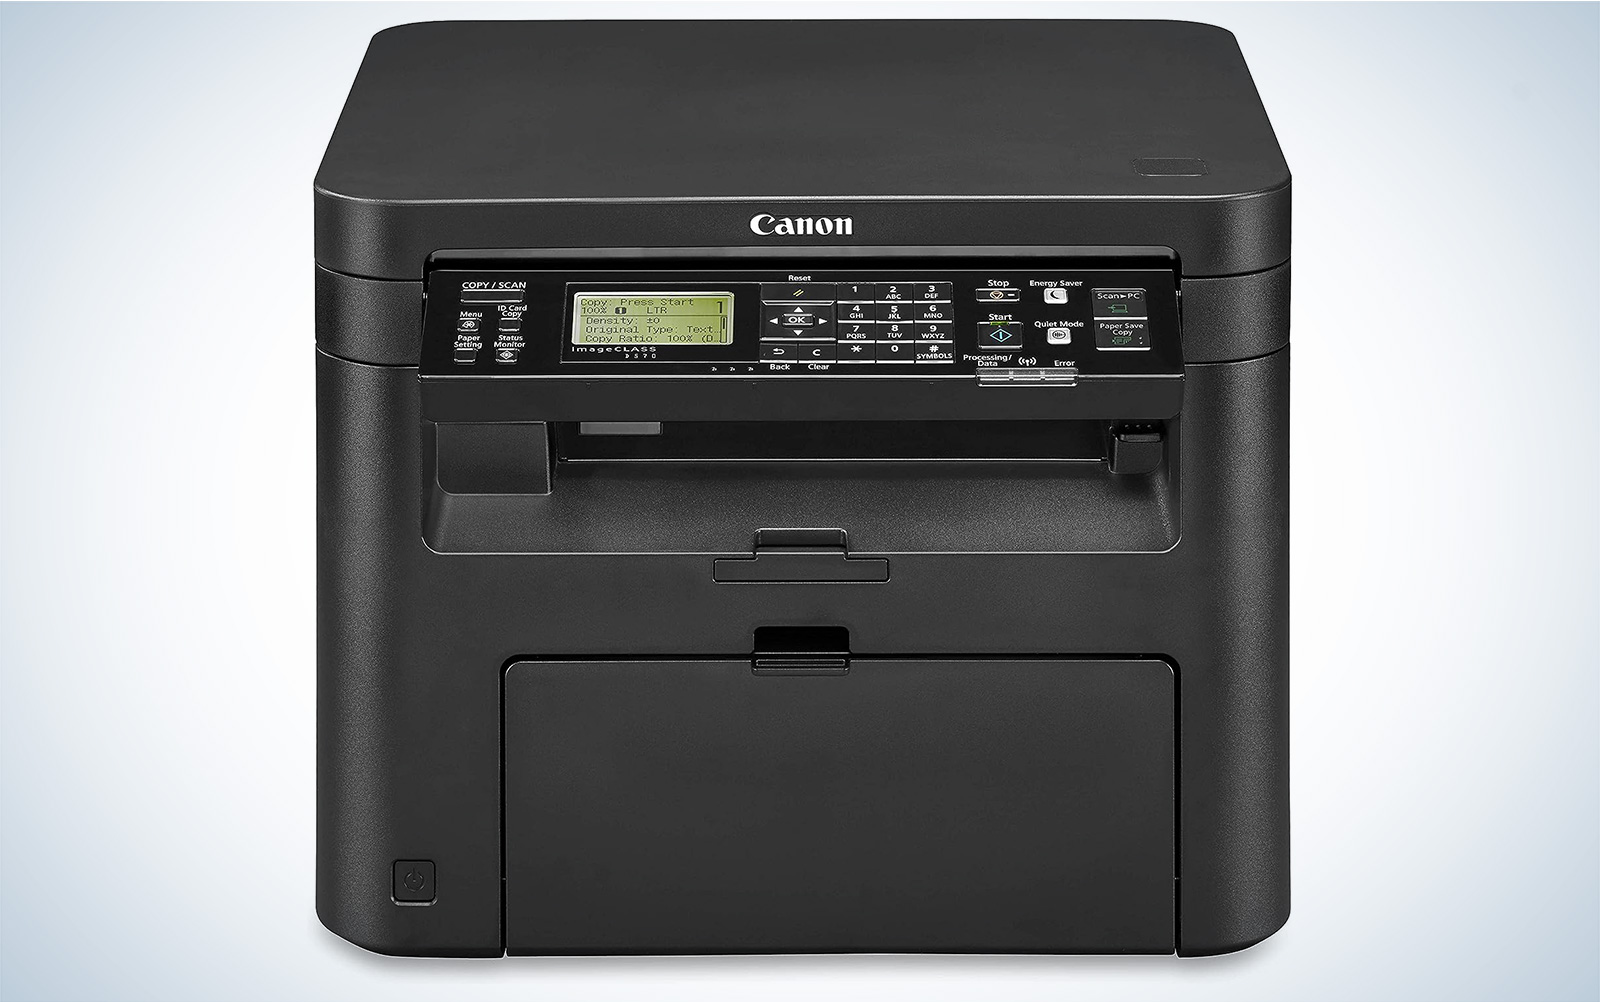 Canon mobile photo printer is on sale for almost $30 off on